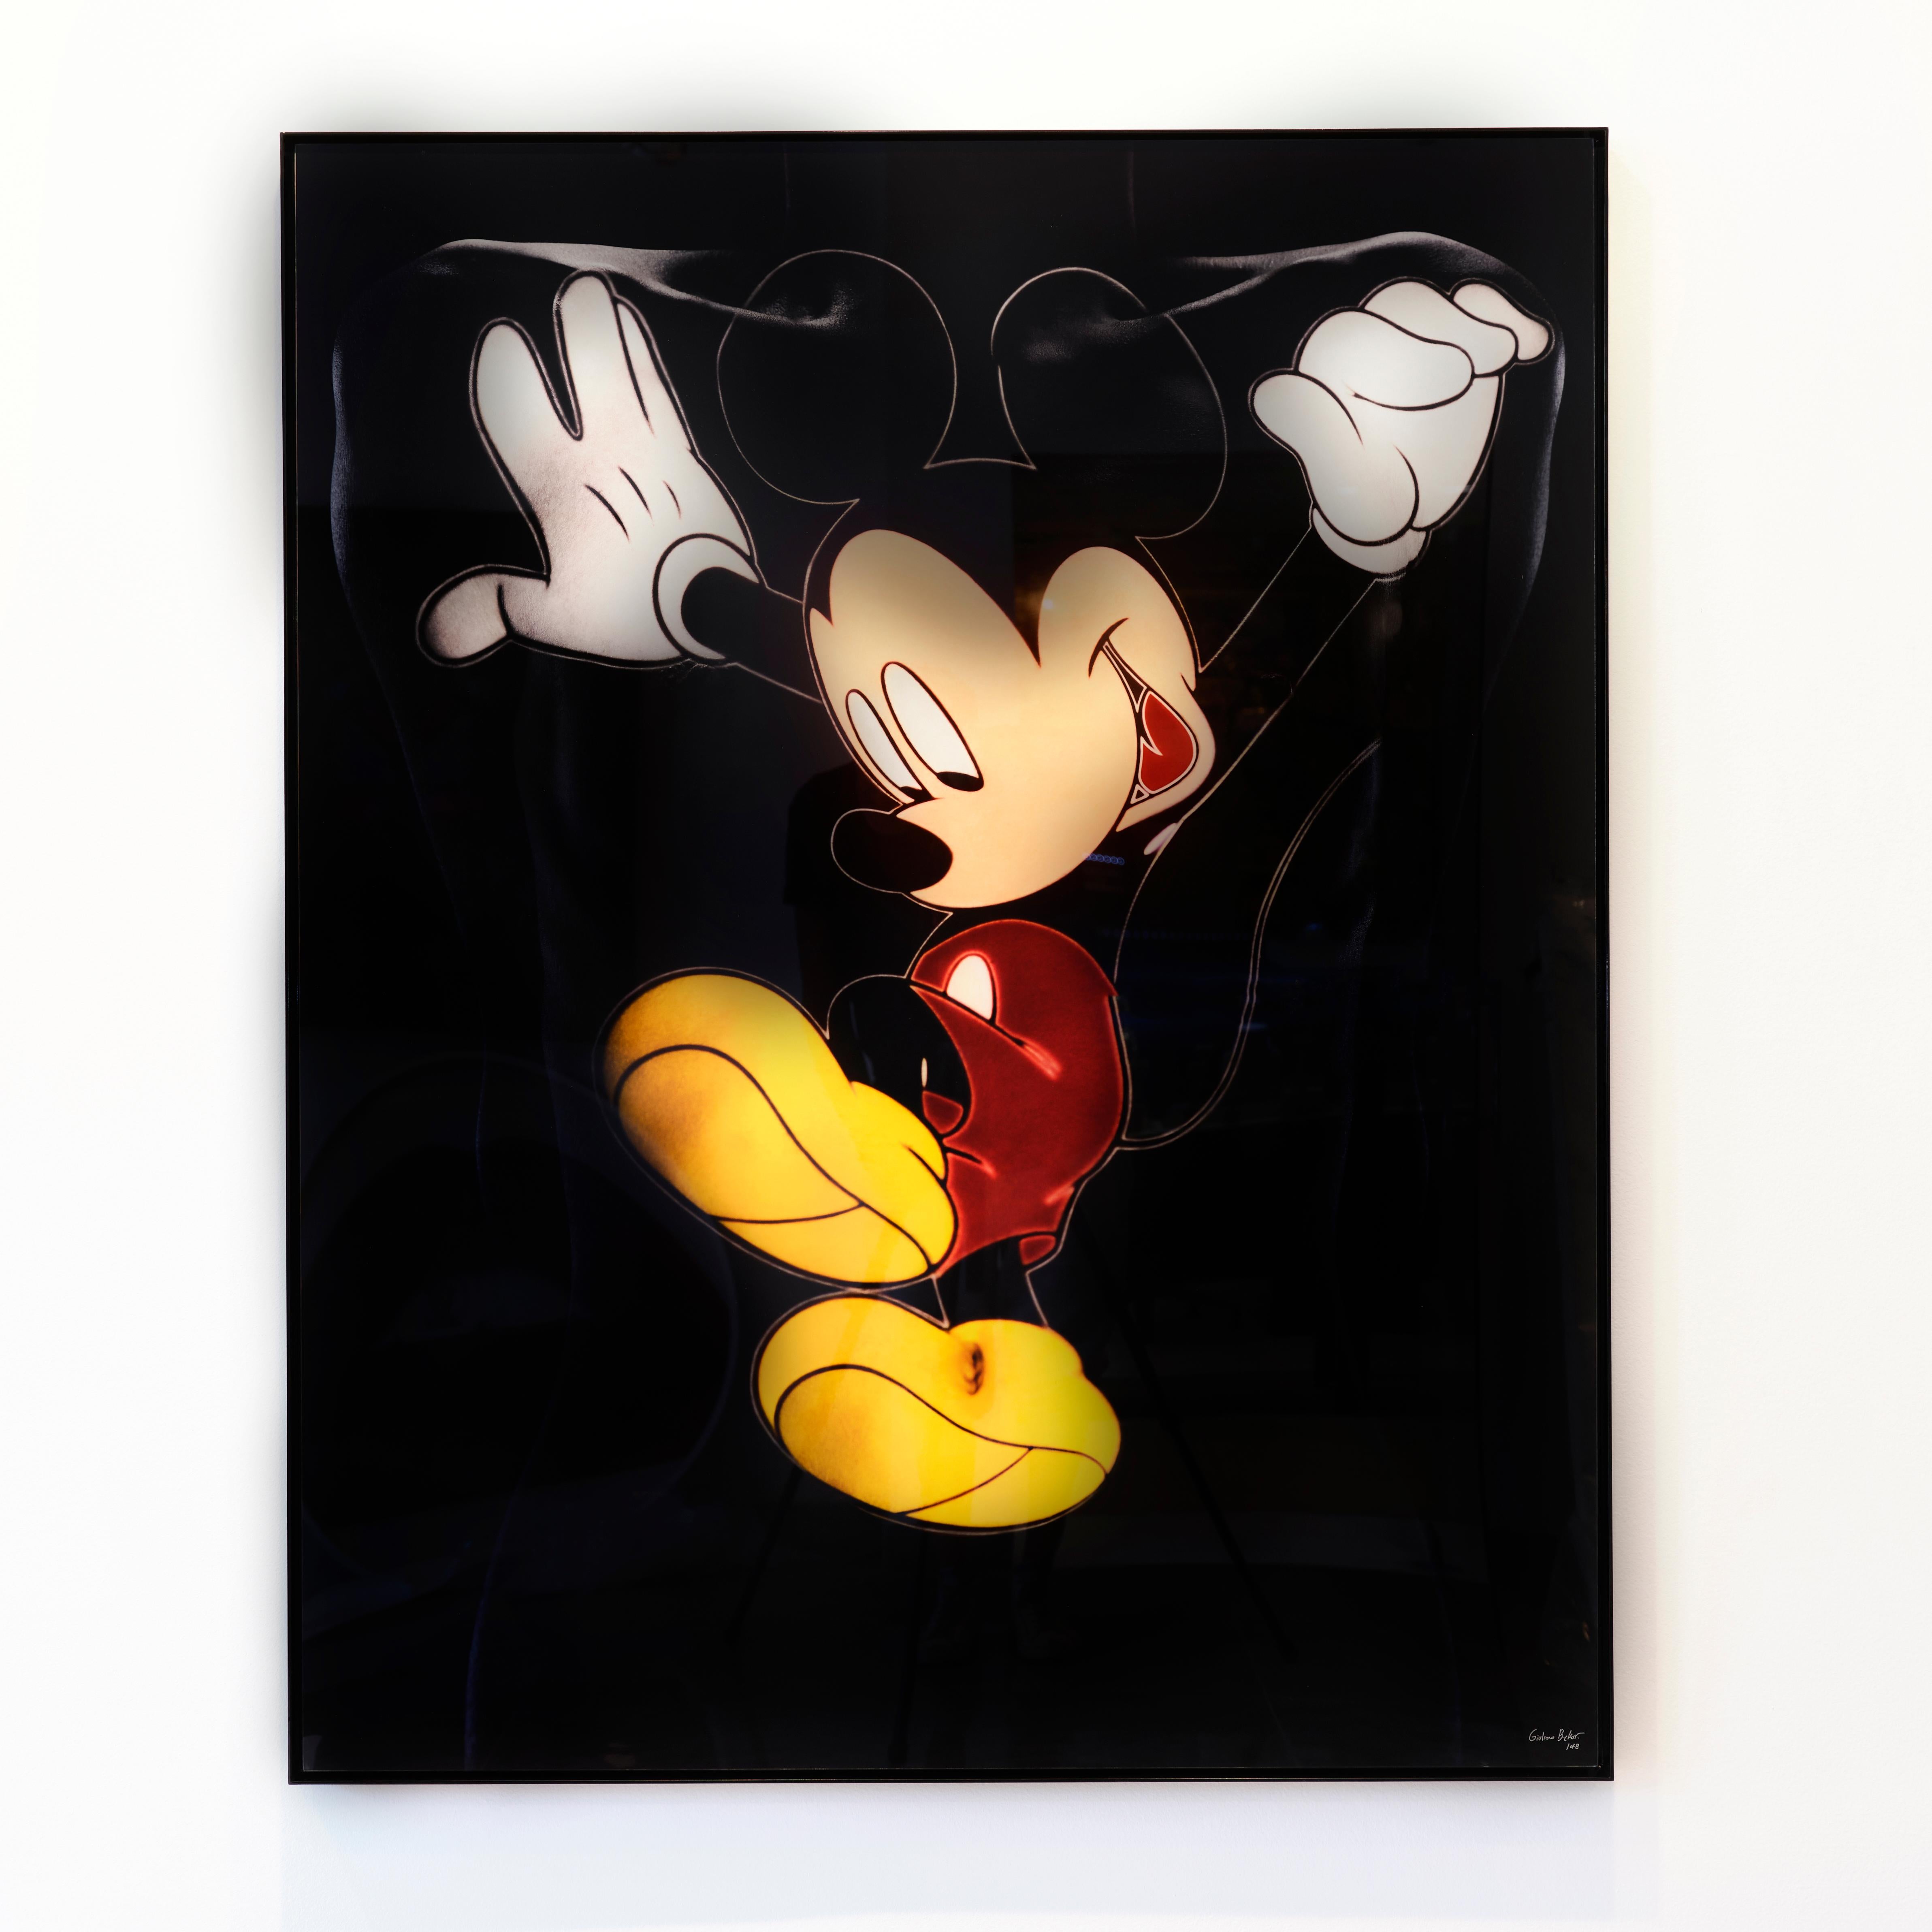 "Minnie/Mickey MM4" (FRAMED) Photography 50" x 40" in Ed. 1/8 by Giuliano Bekor